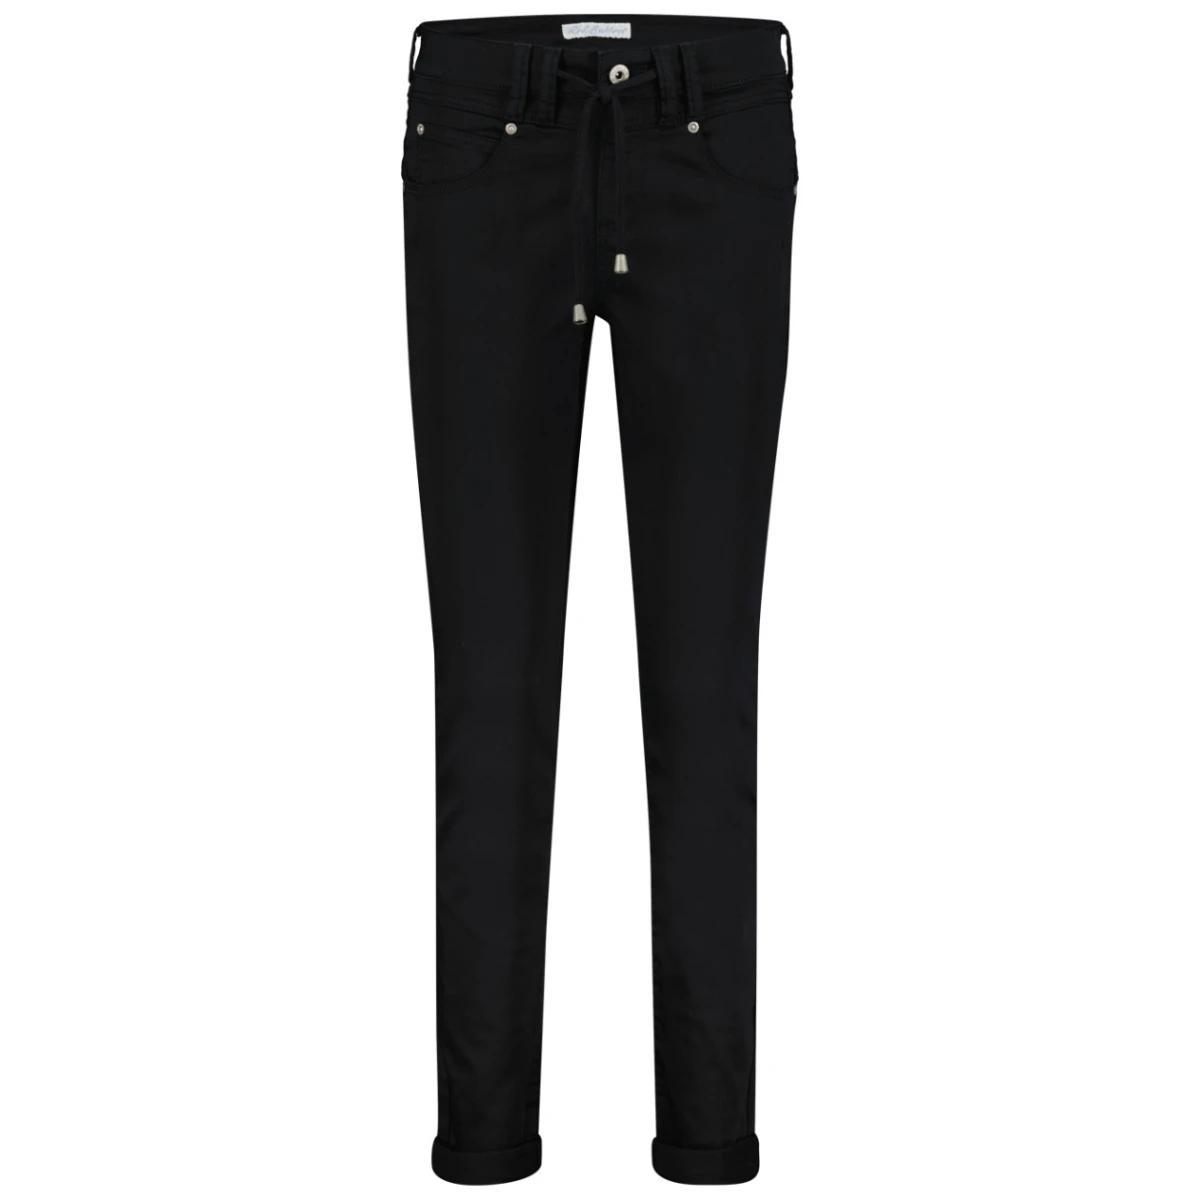 Red Button Jeans Diana Fancy Check Black SRB4115